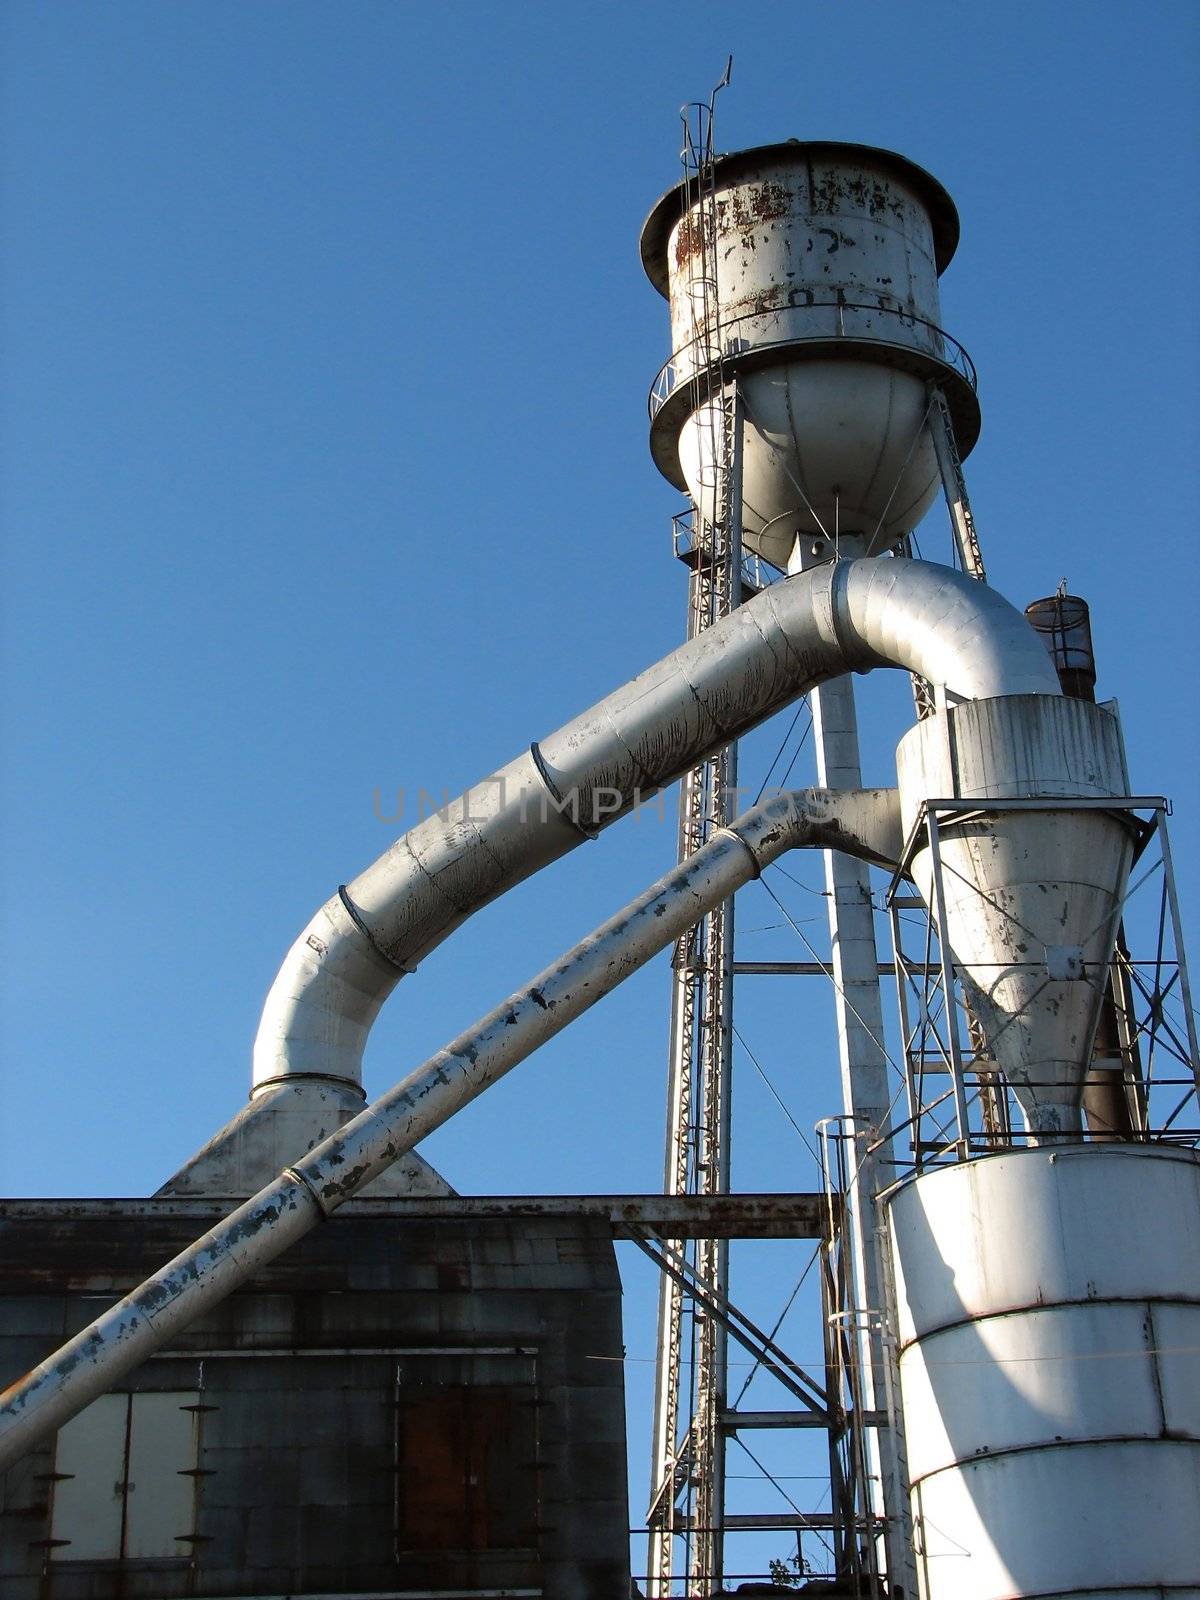 Shot of an old factory and water tower on a blue sky background.